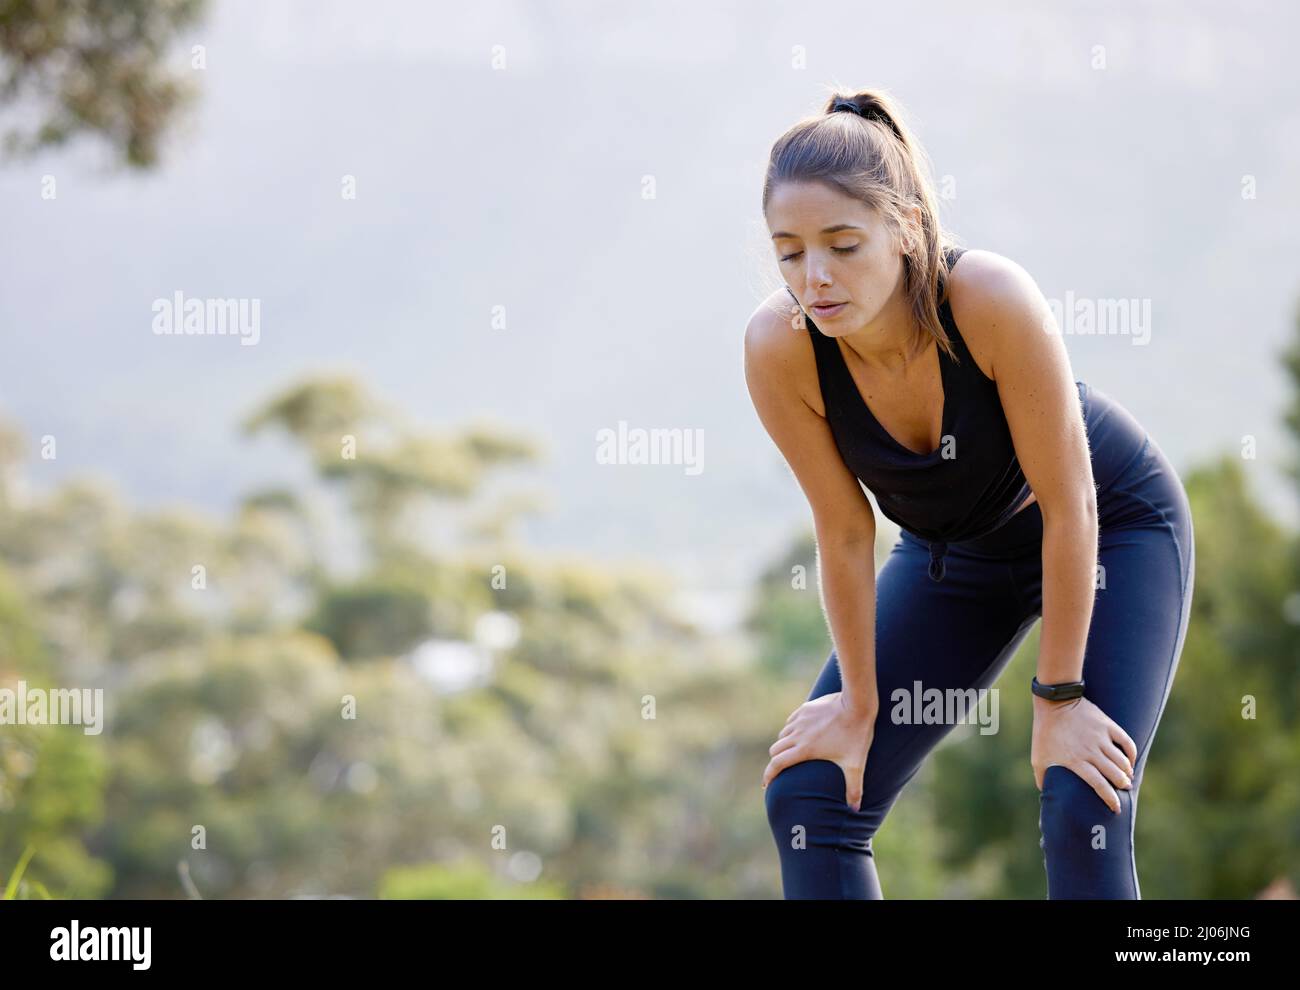 Some days will be more challenging than others. Shot of a sporty young woman catching her breath while exercising outdoors. Stock Photo